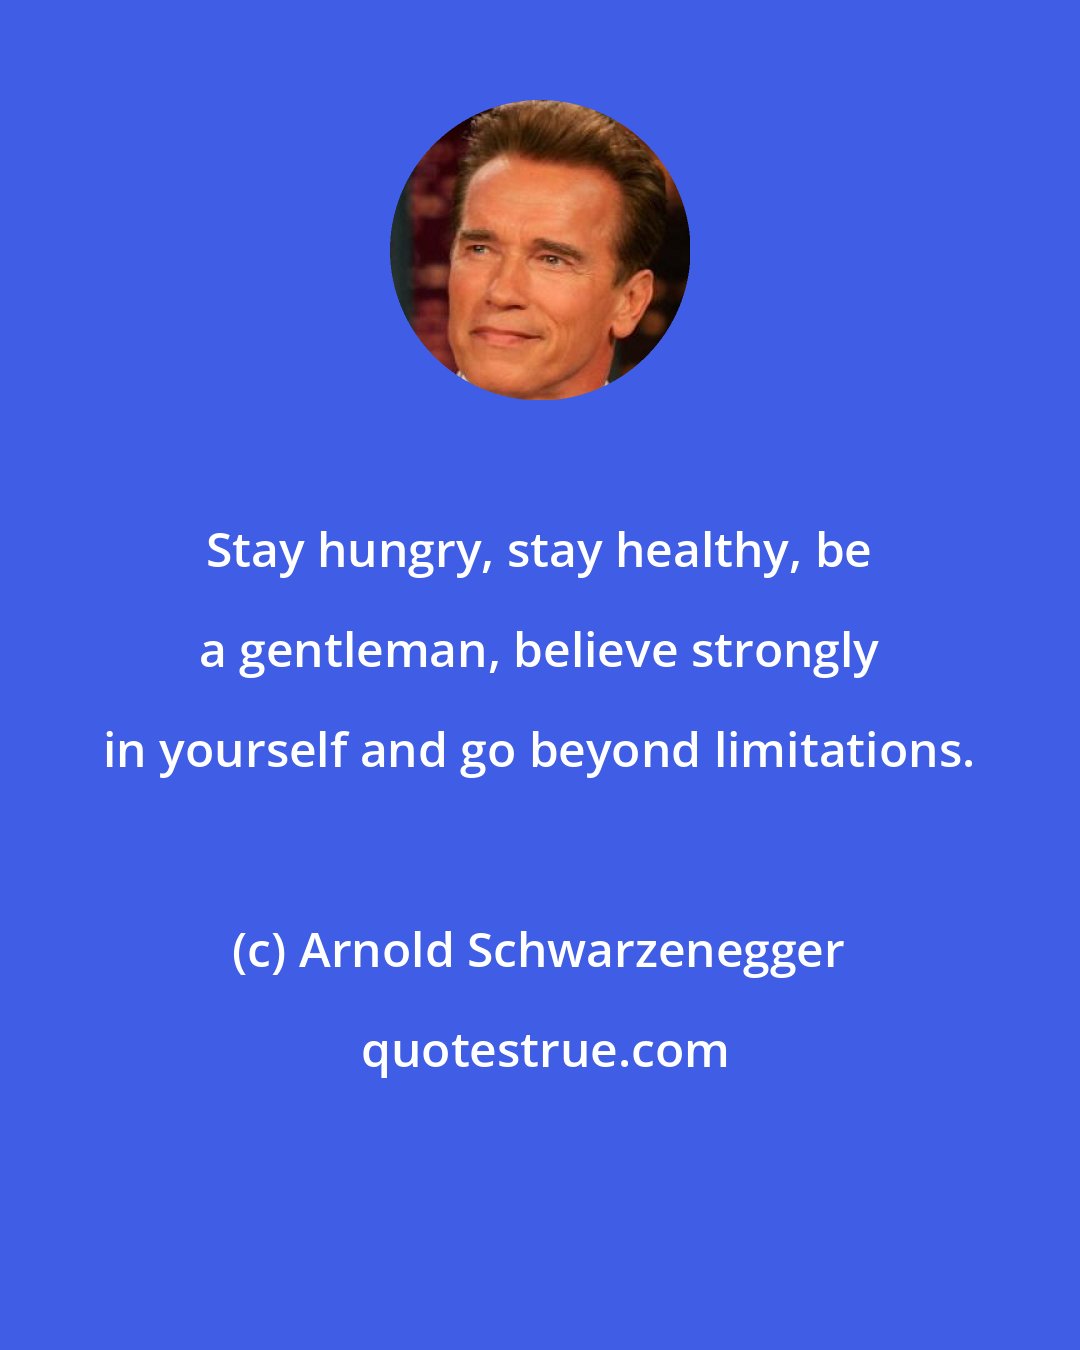 Arnold Schwarzenegger: Stay hungry, stay healthy, be a gentleman, believe strongly in yourself and go beyond limitations.